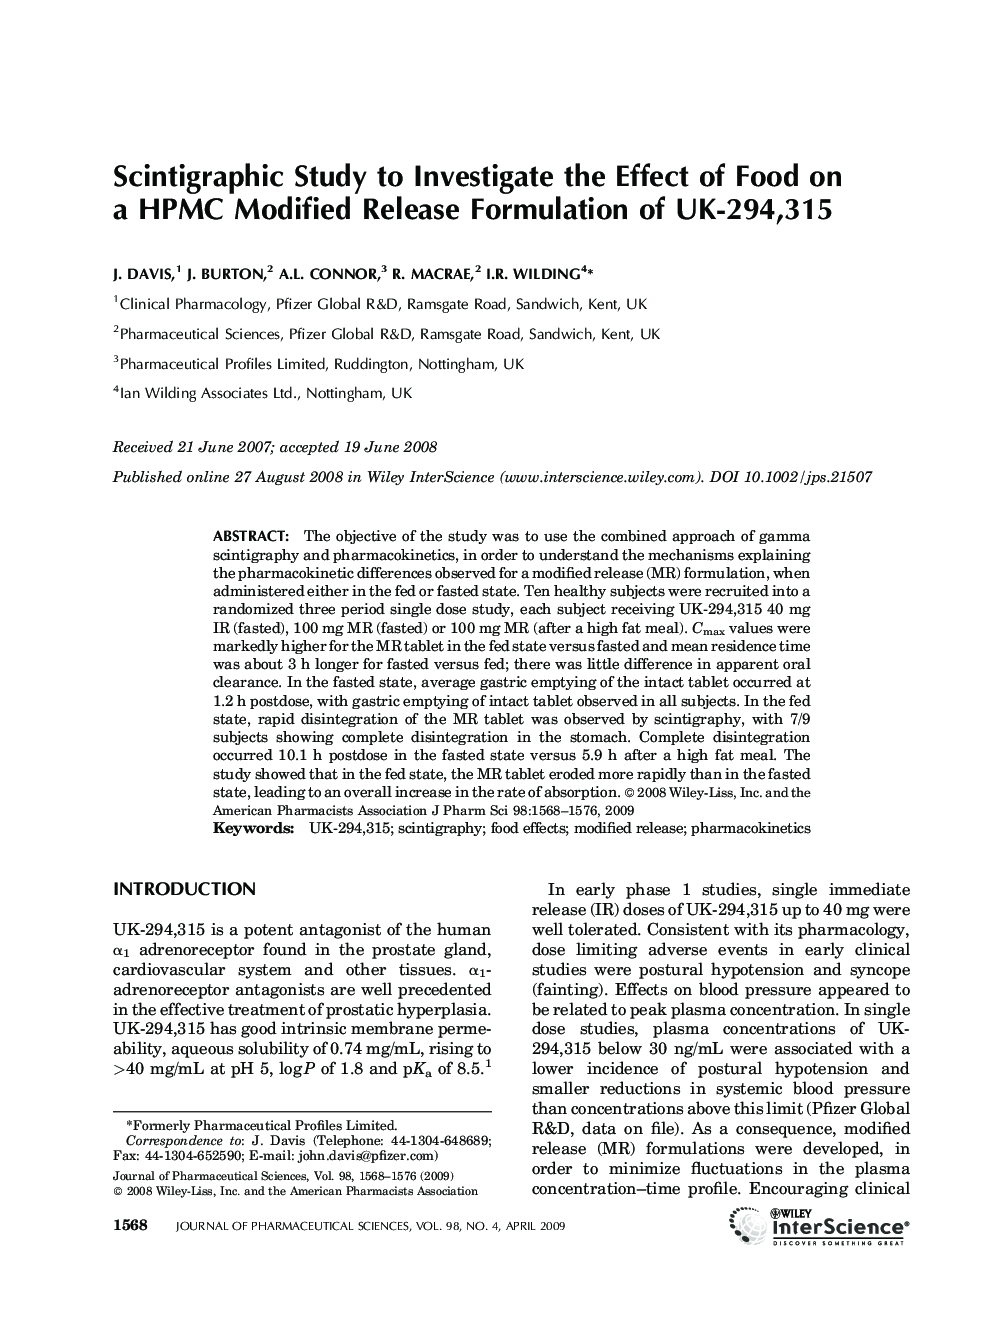 Scintigraphic Study to Investigate the Effect of Food on a HPMC Modified Release Formulation of UK-294,315